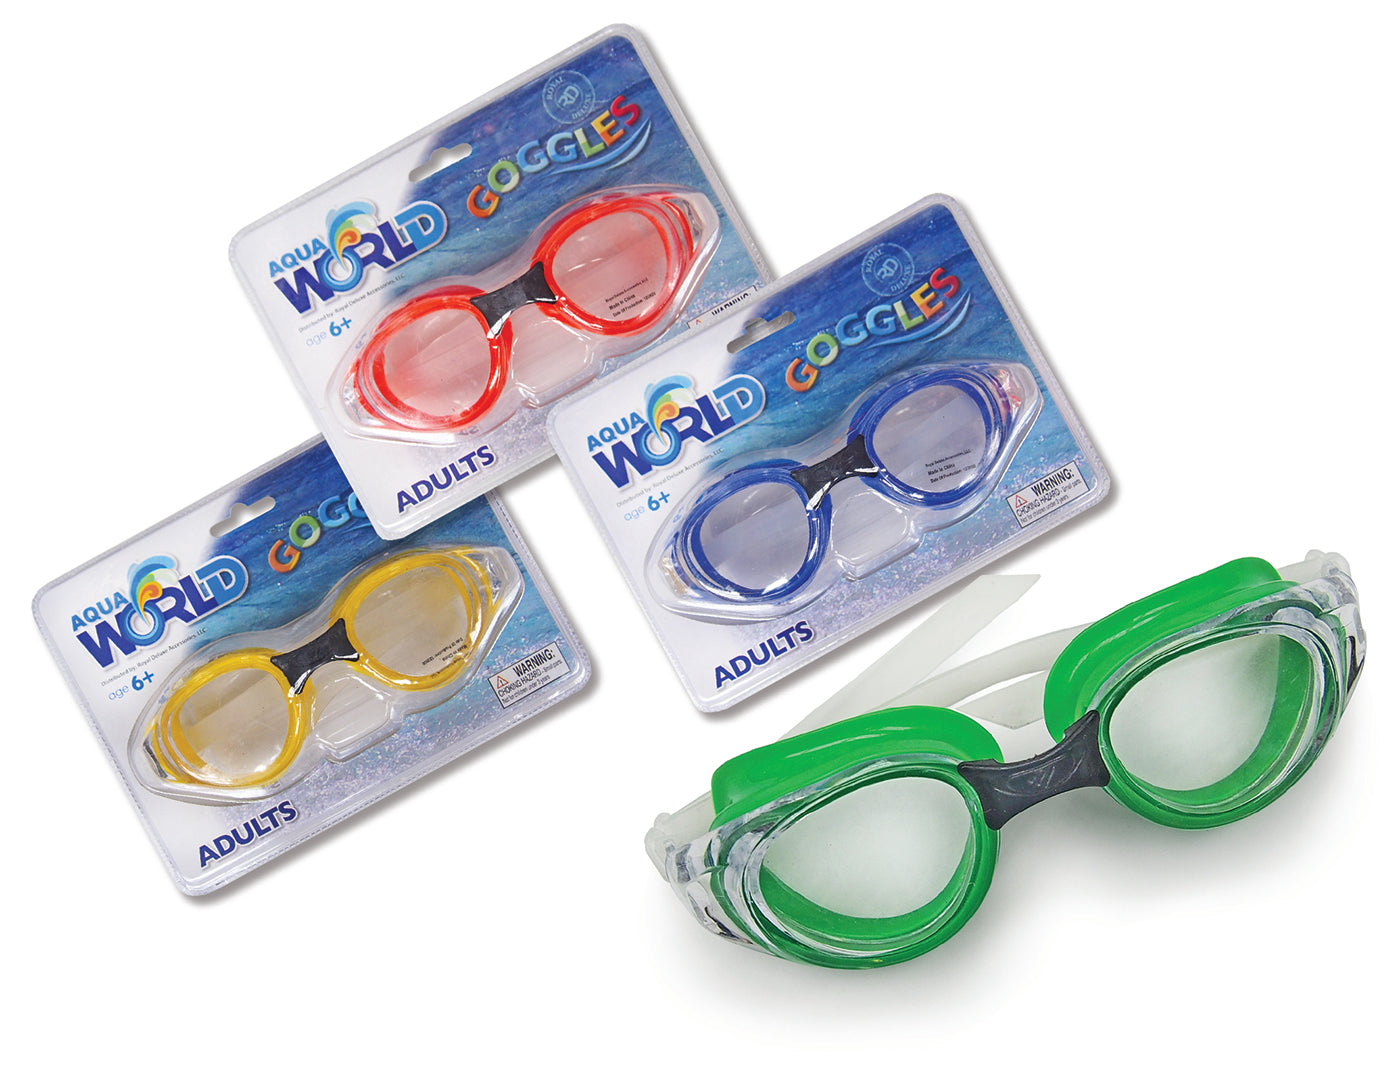 2-Pack AquaWorld Swimming Goggles for Adults or Kids